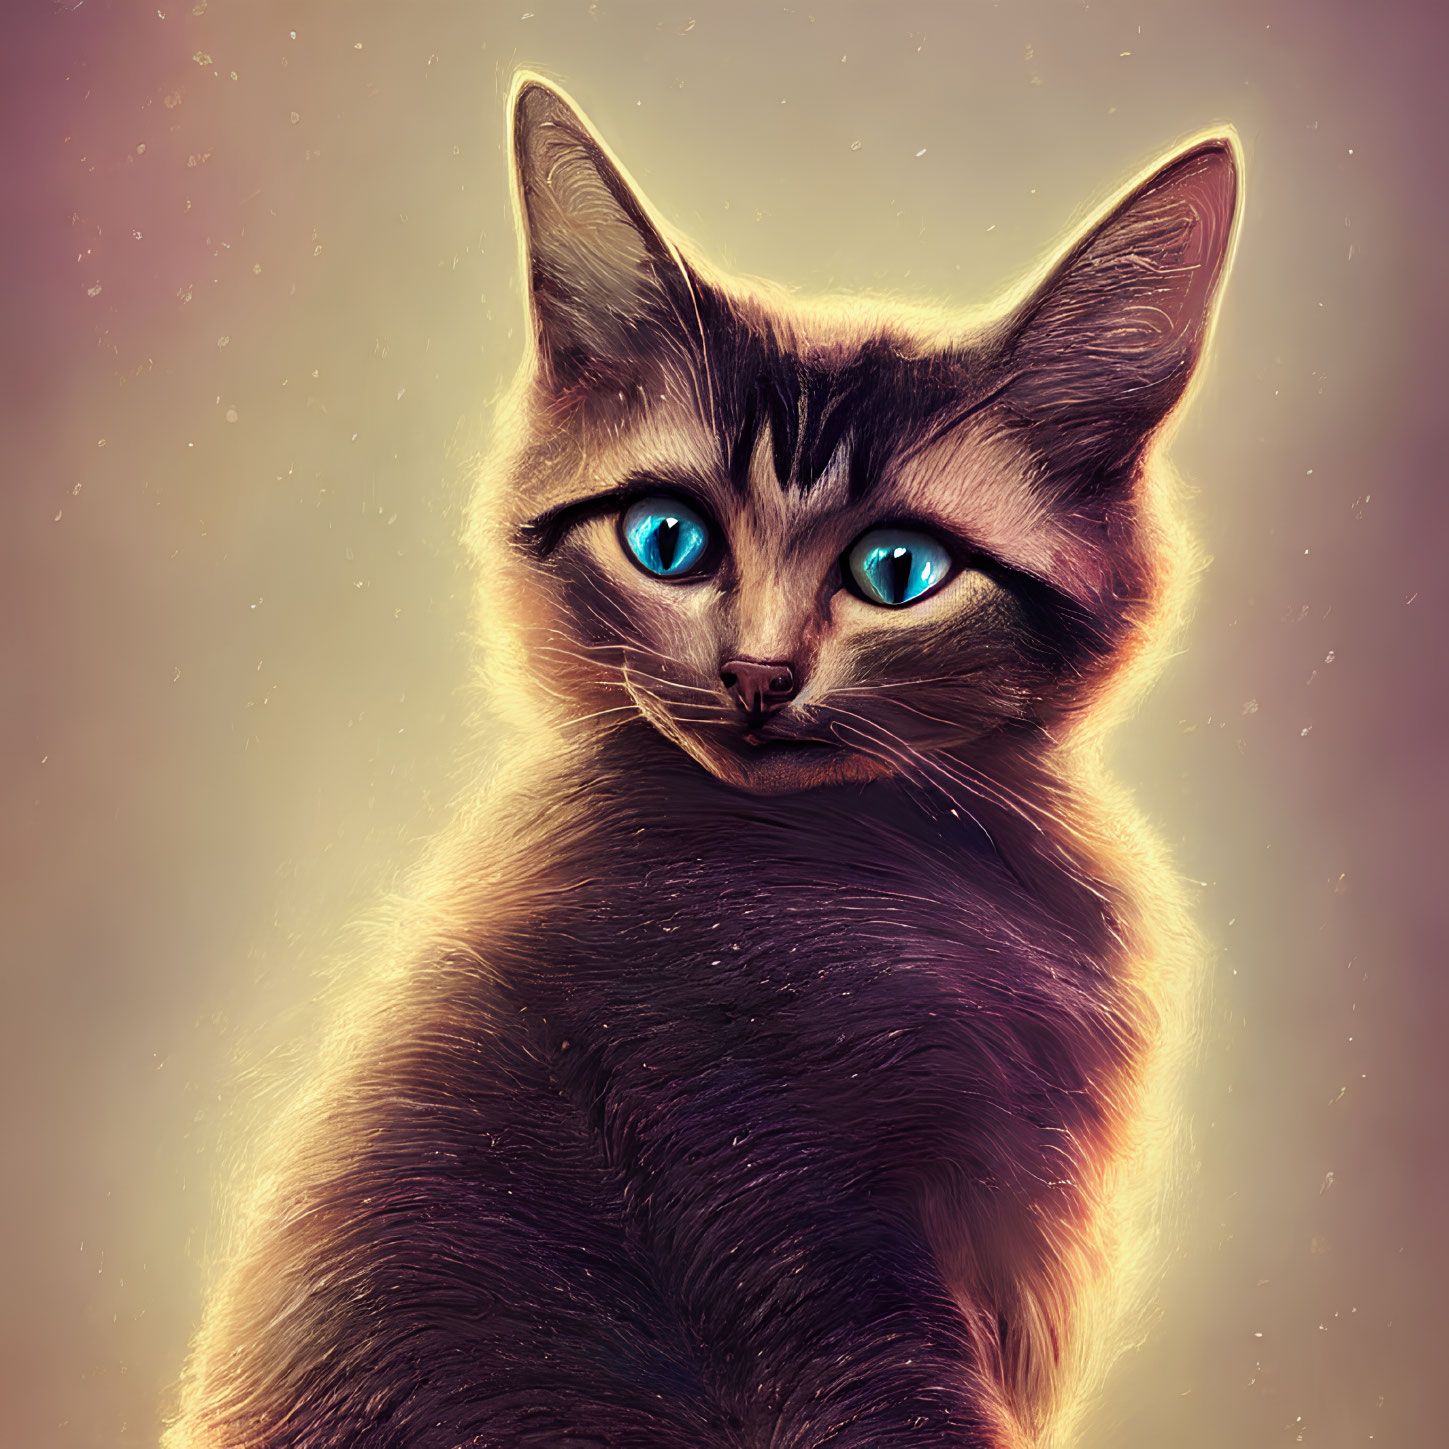 Digital Artwork: Cat with Bright Blue Eyes and Glossy Fur Coat